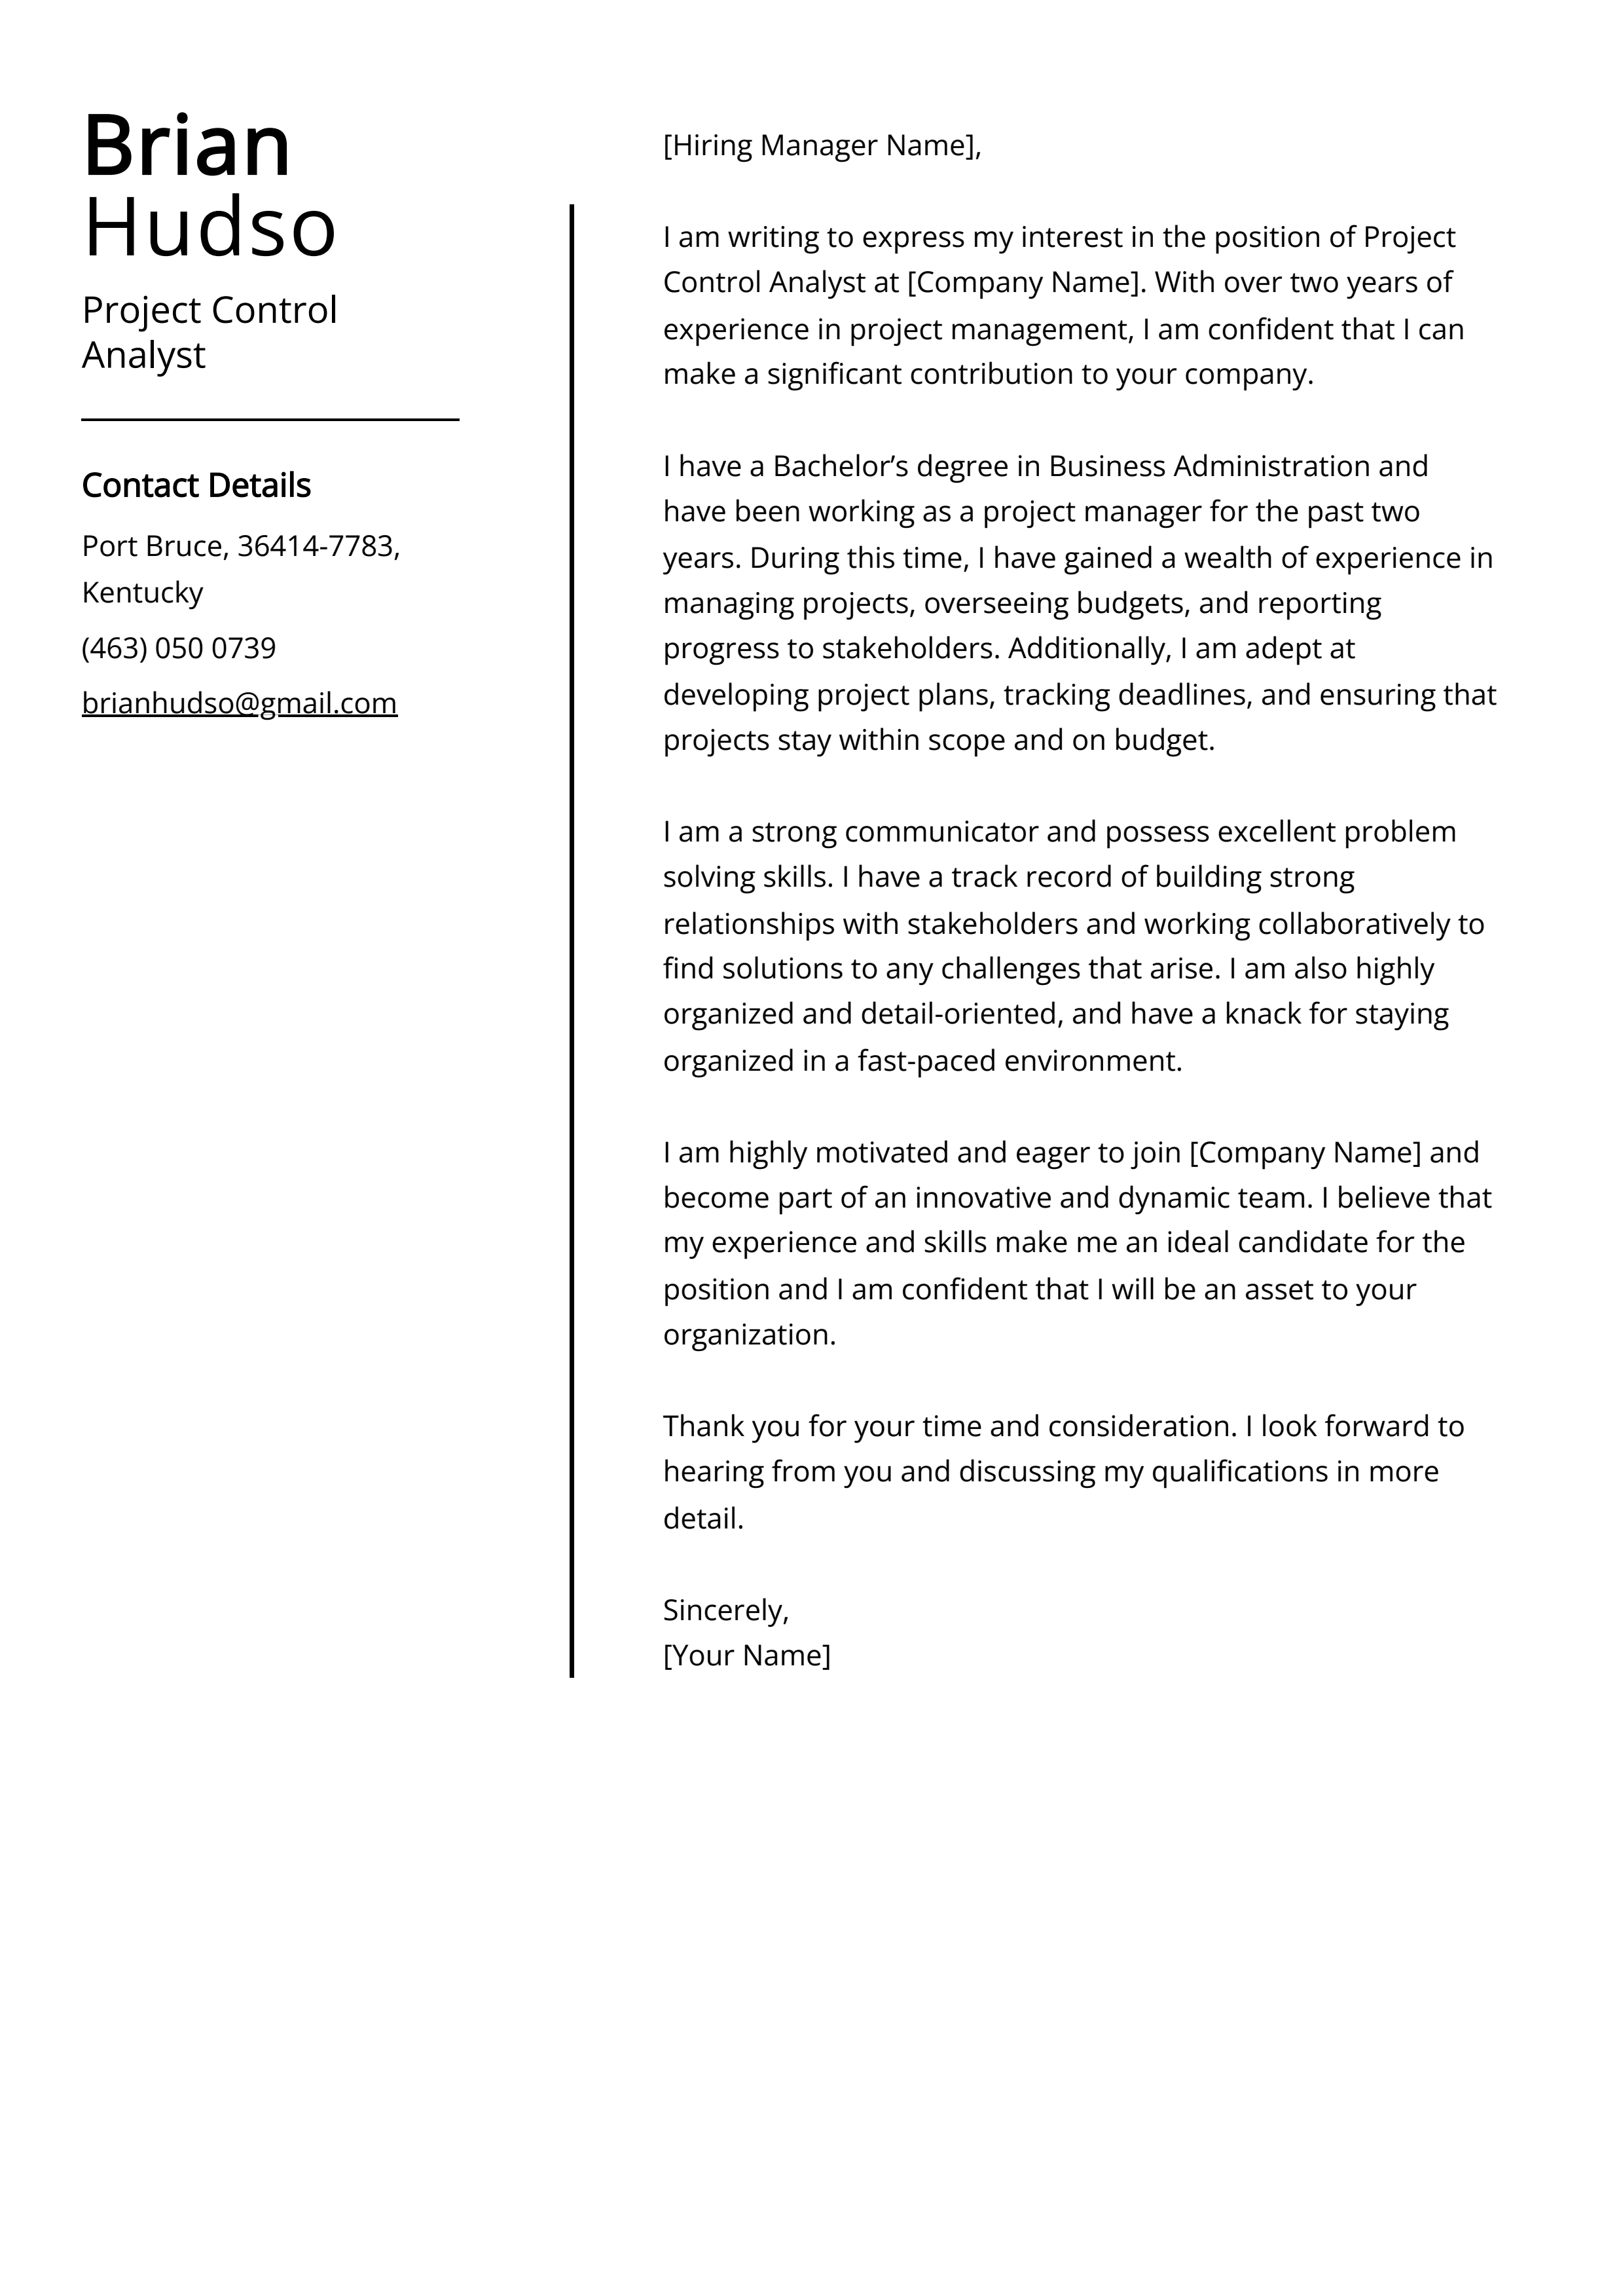 Project Control Analyst Cover Letter Example